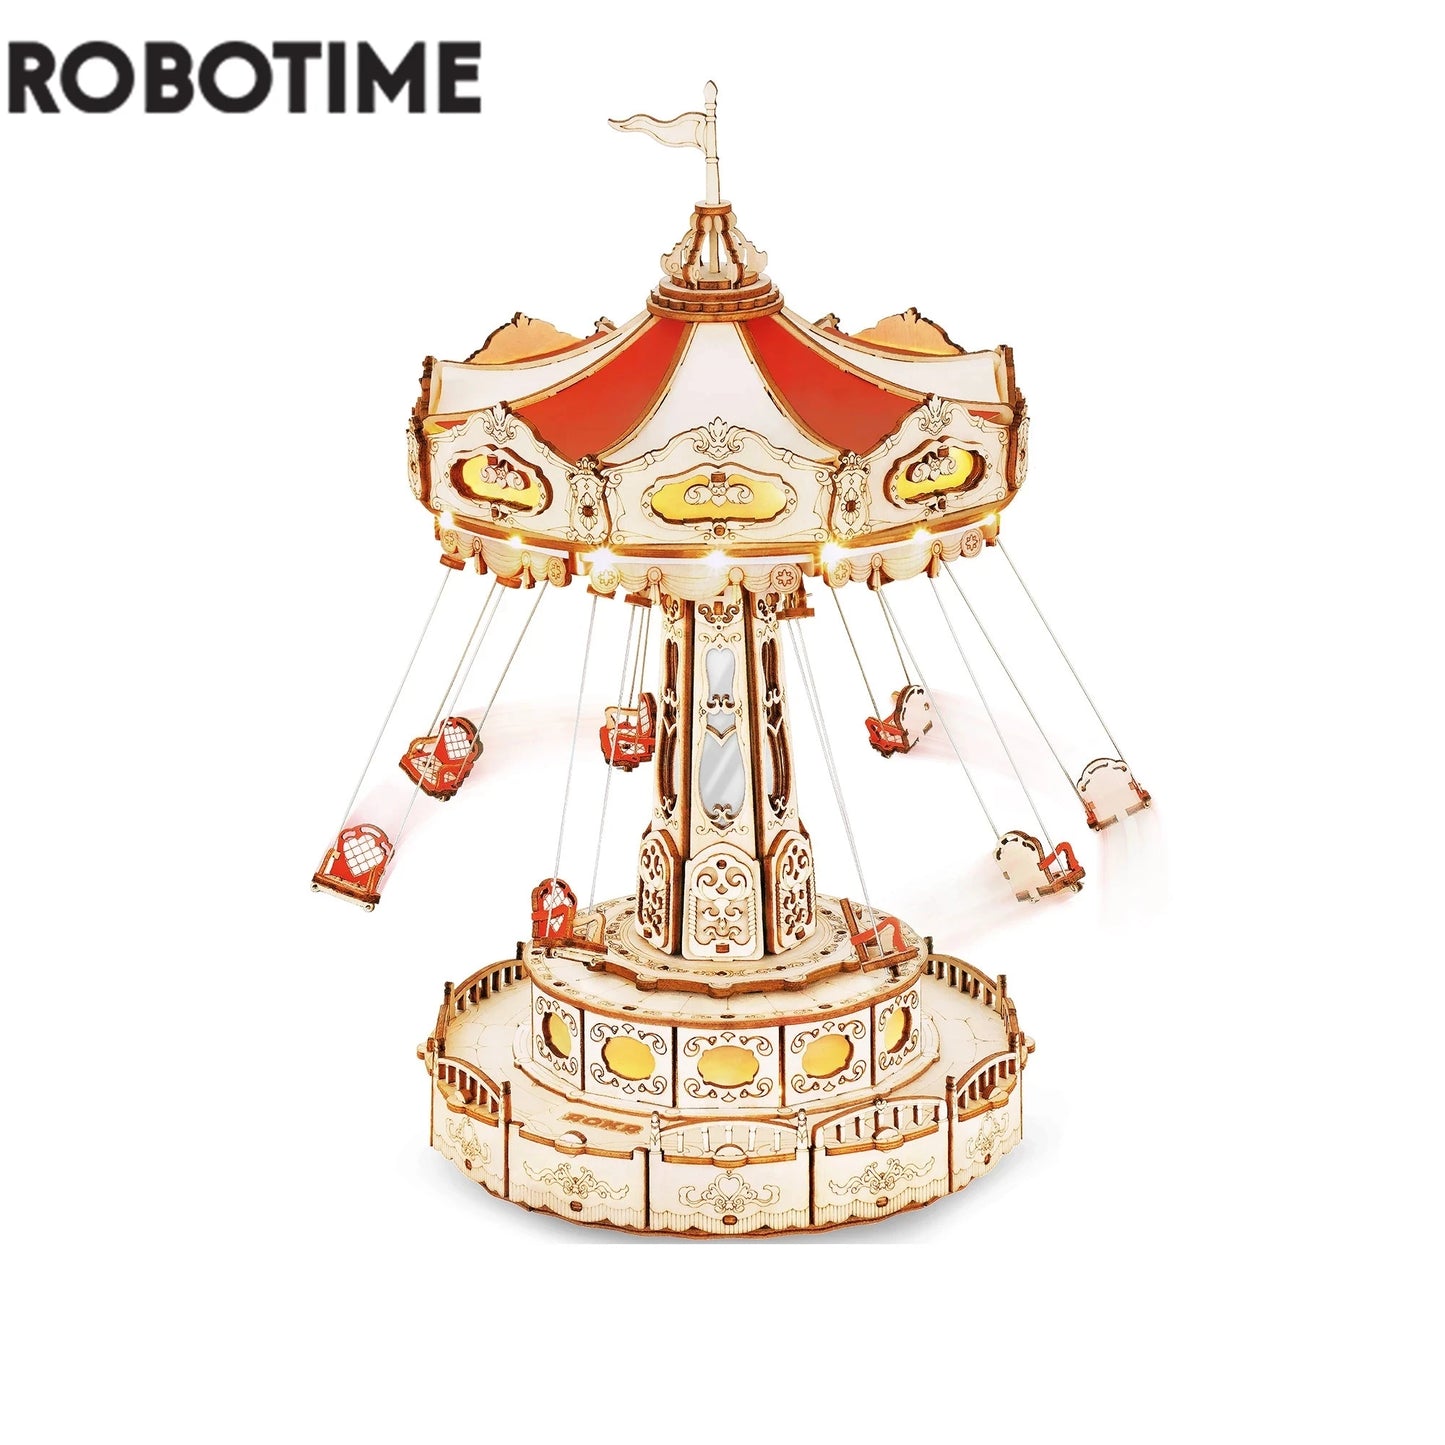 DIY Robotime Rokr Swing Ride Music Box Building Block - 3D Wooden Puzzle for Kids & Adults - Easy Assembly - Battery & Wax Not Included